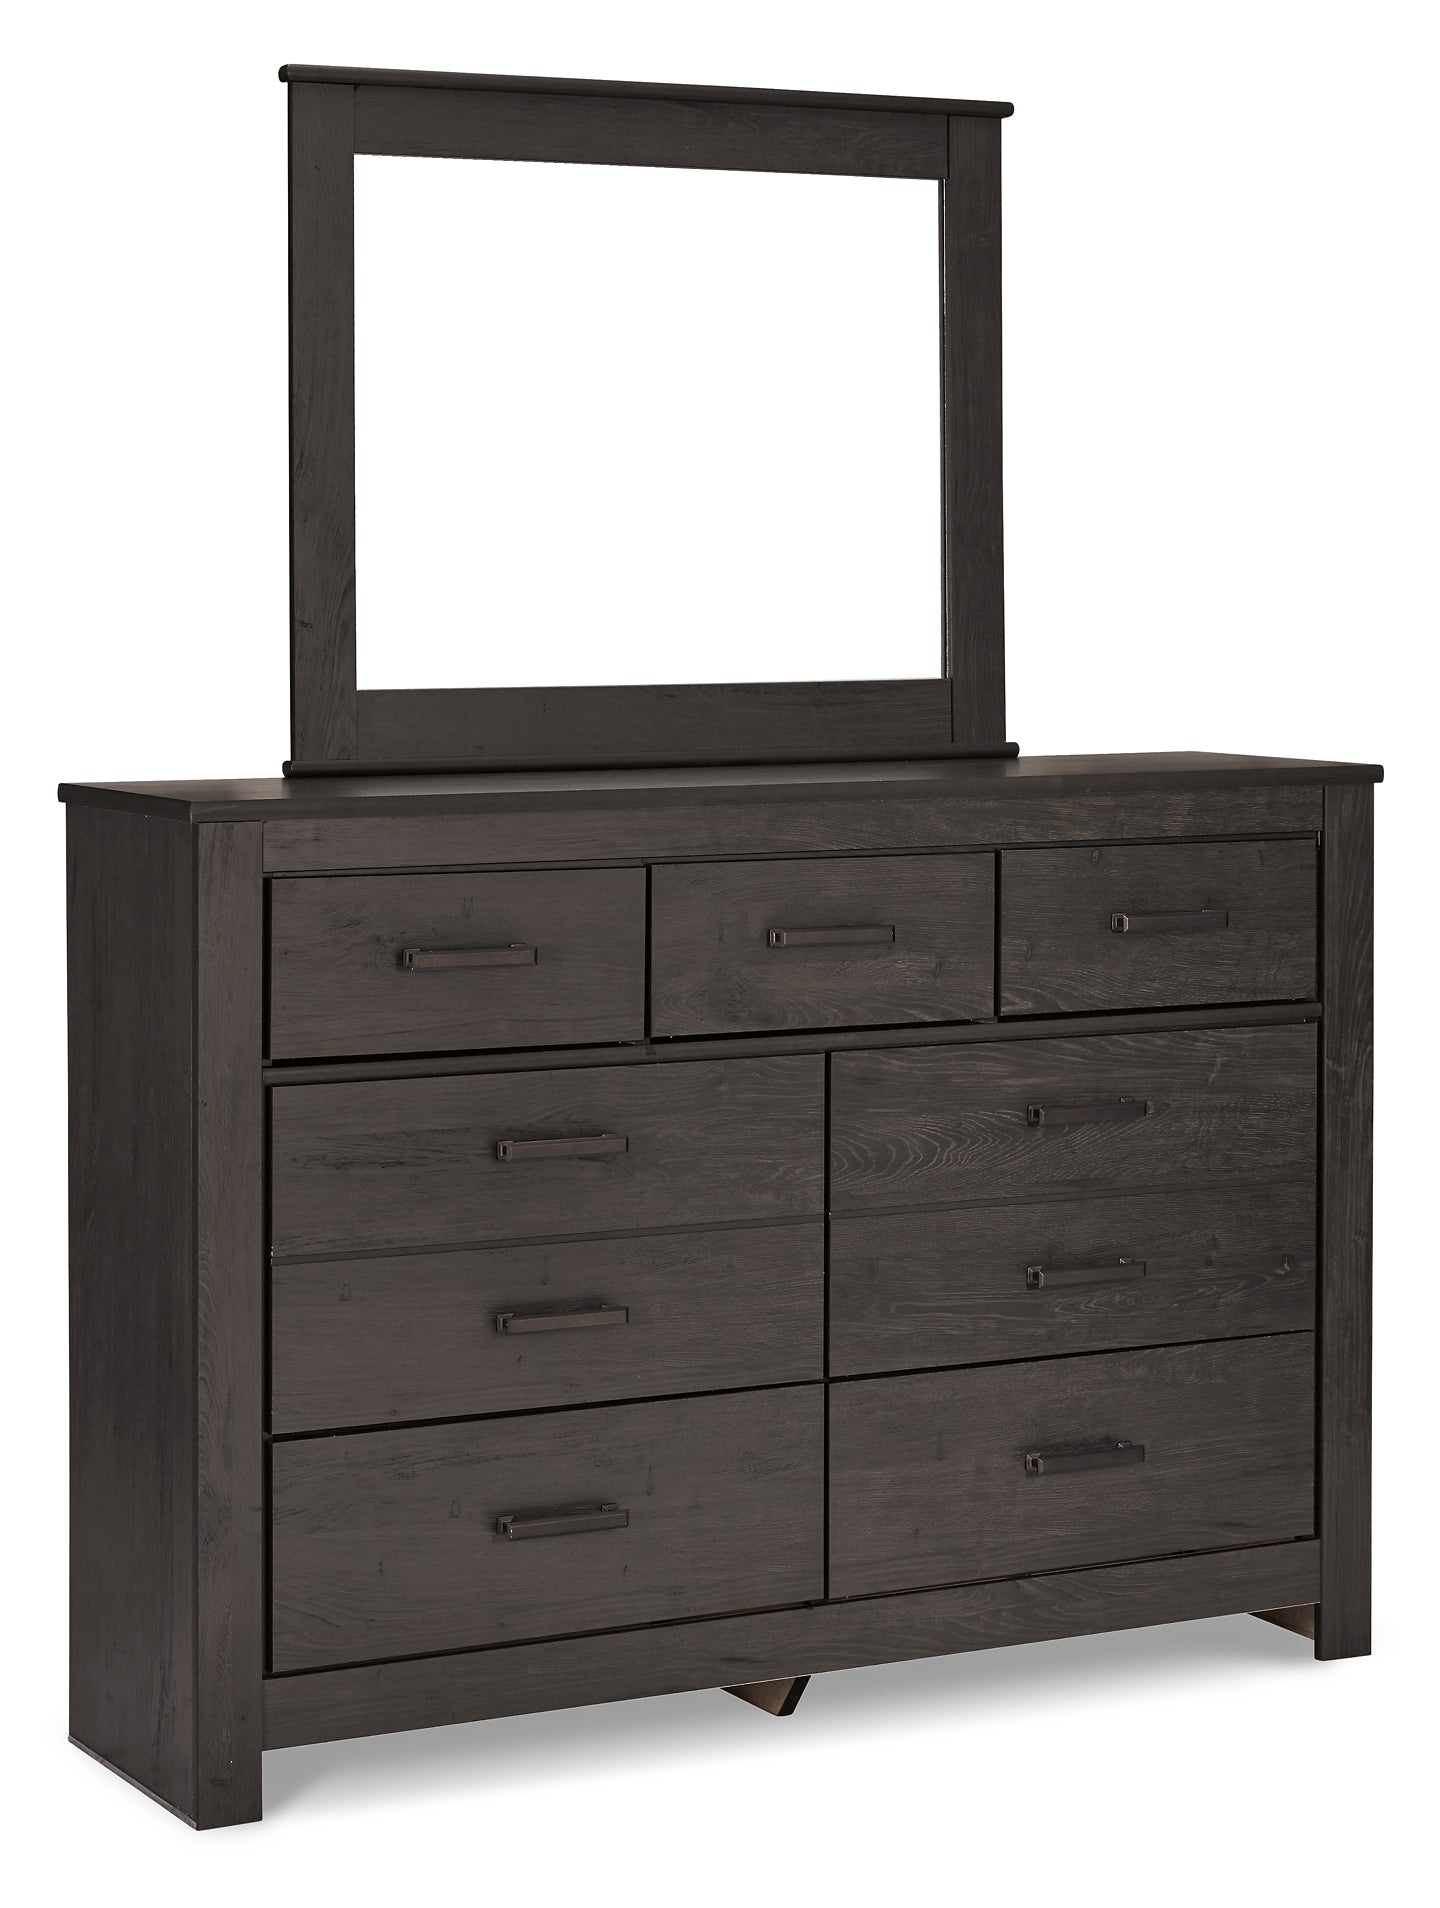 Brinxton Queen/Full Panel Headboard with Mirrored Dresser and 2 Nightstands Rent Wise Rent To Own Jacksonville, Florida